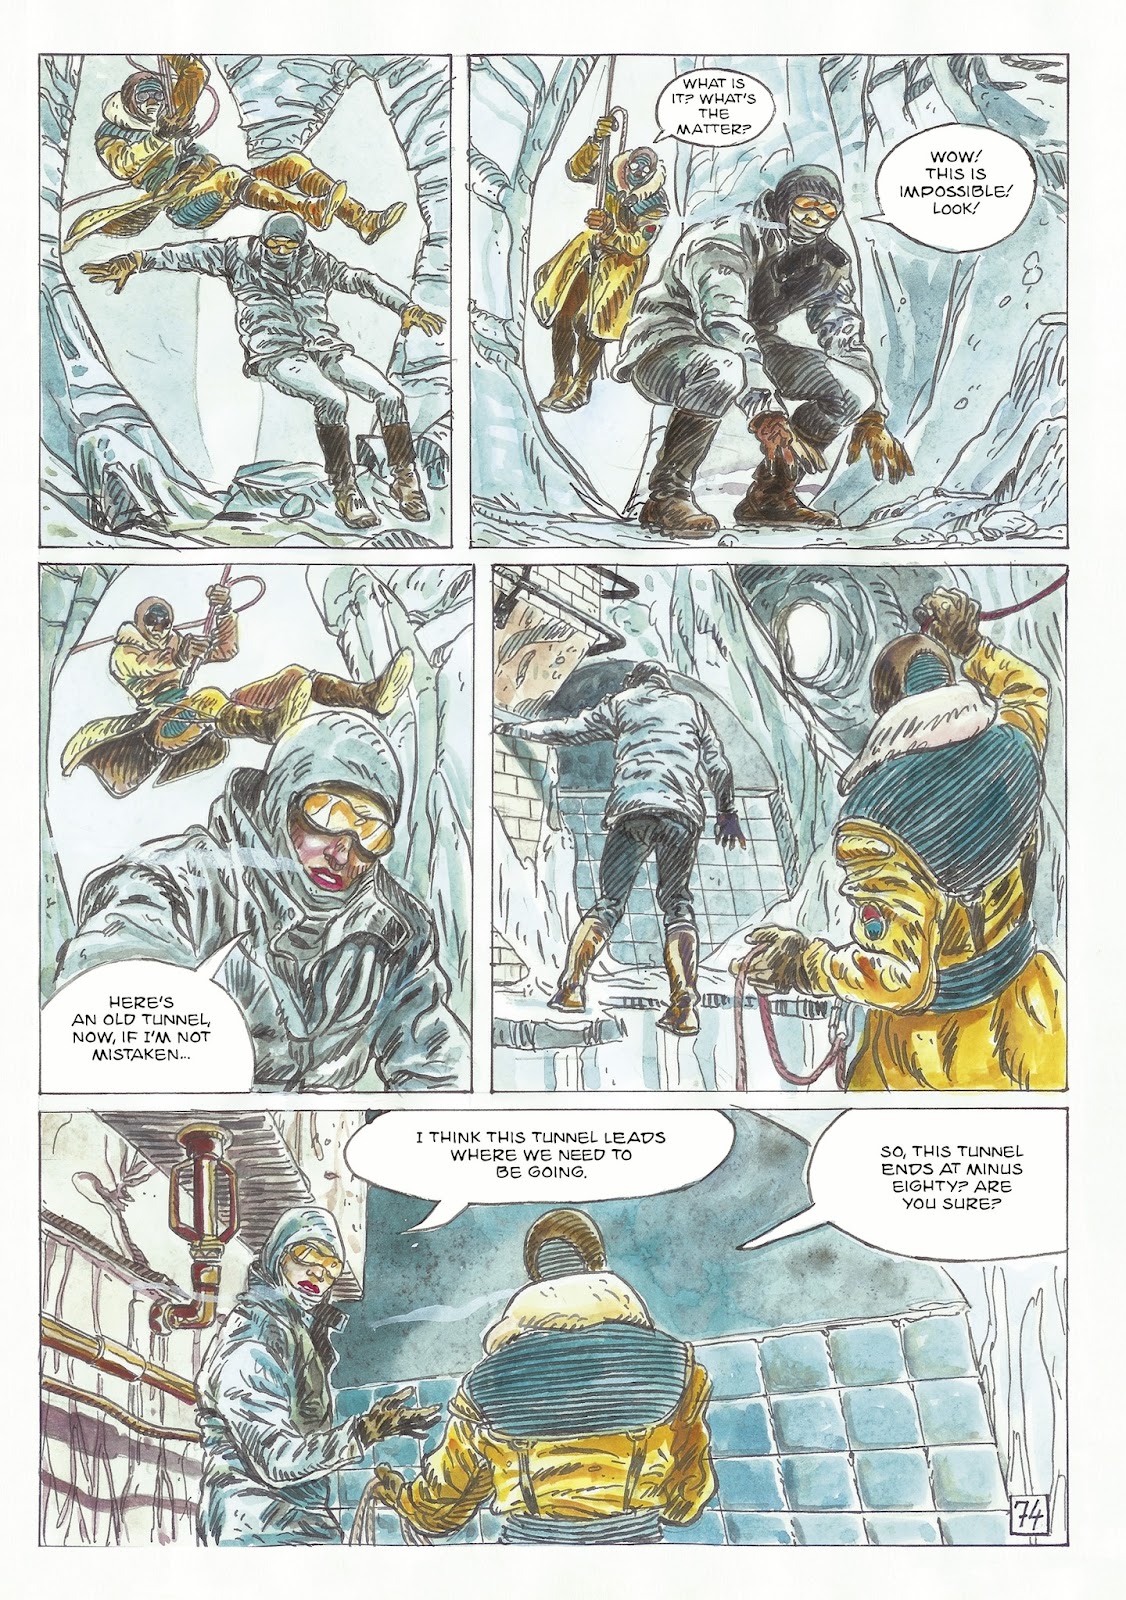 The Man With the Bear issue 2 - Page 20